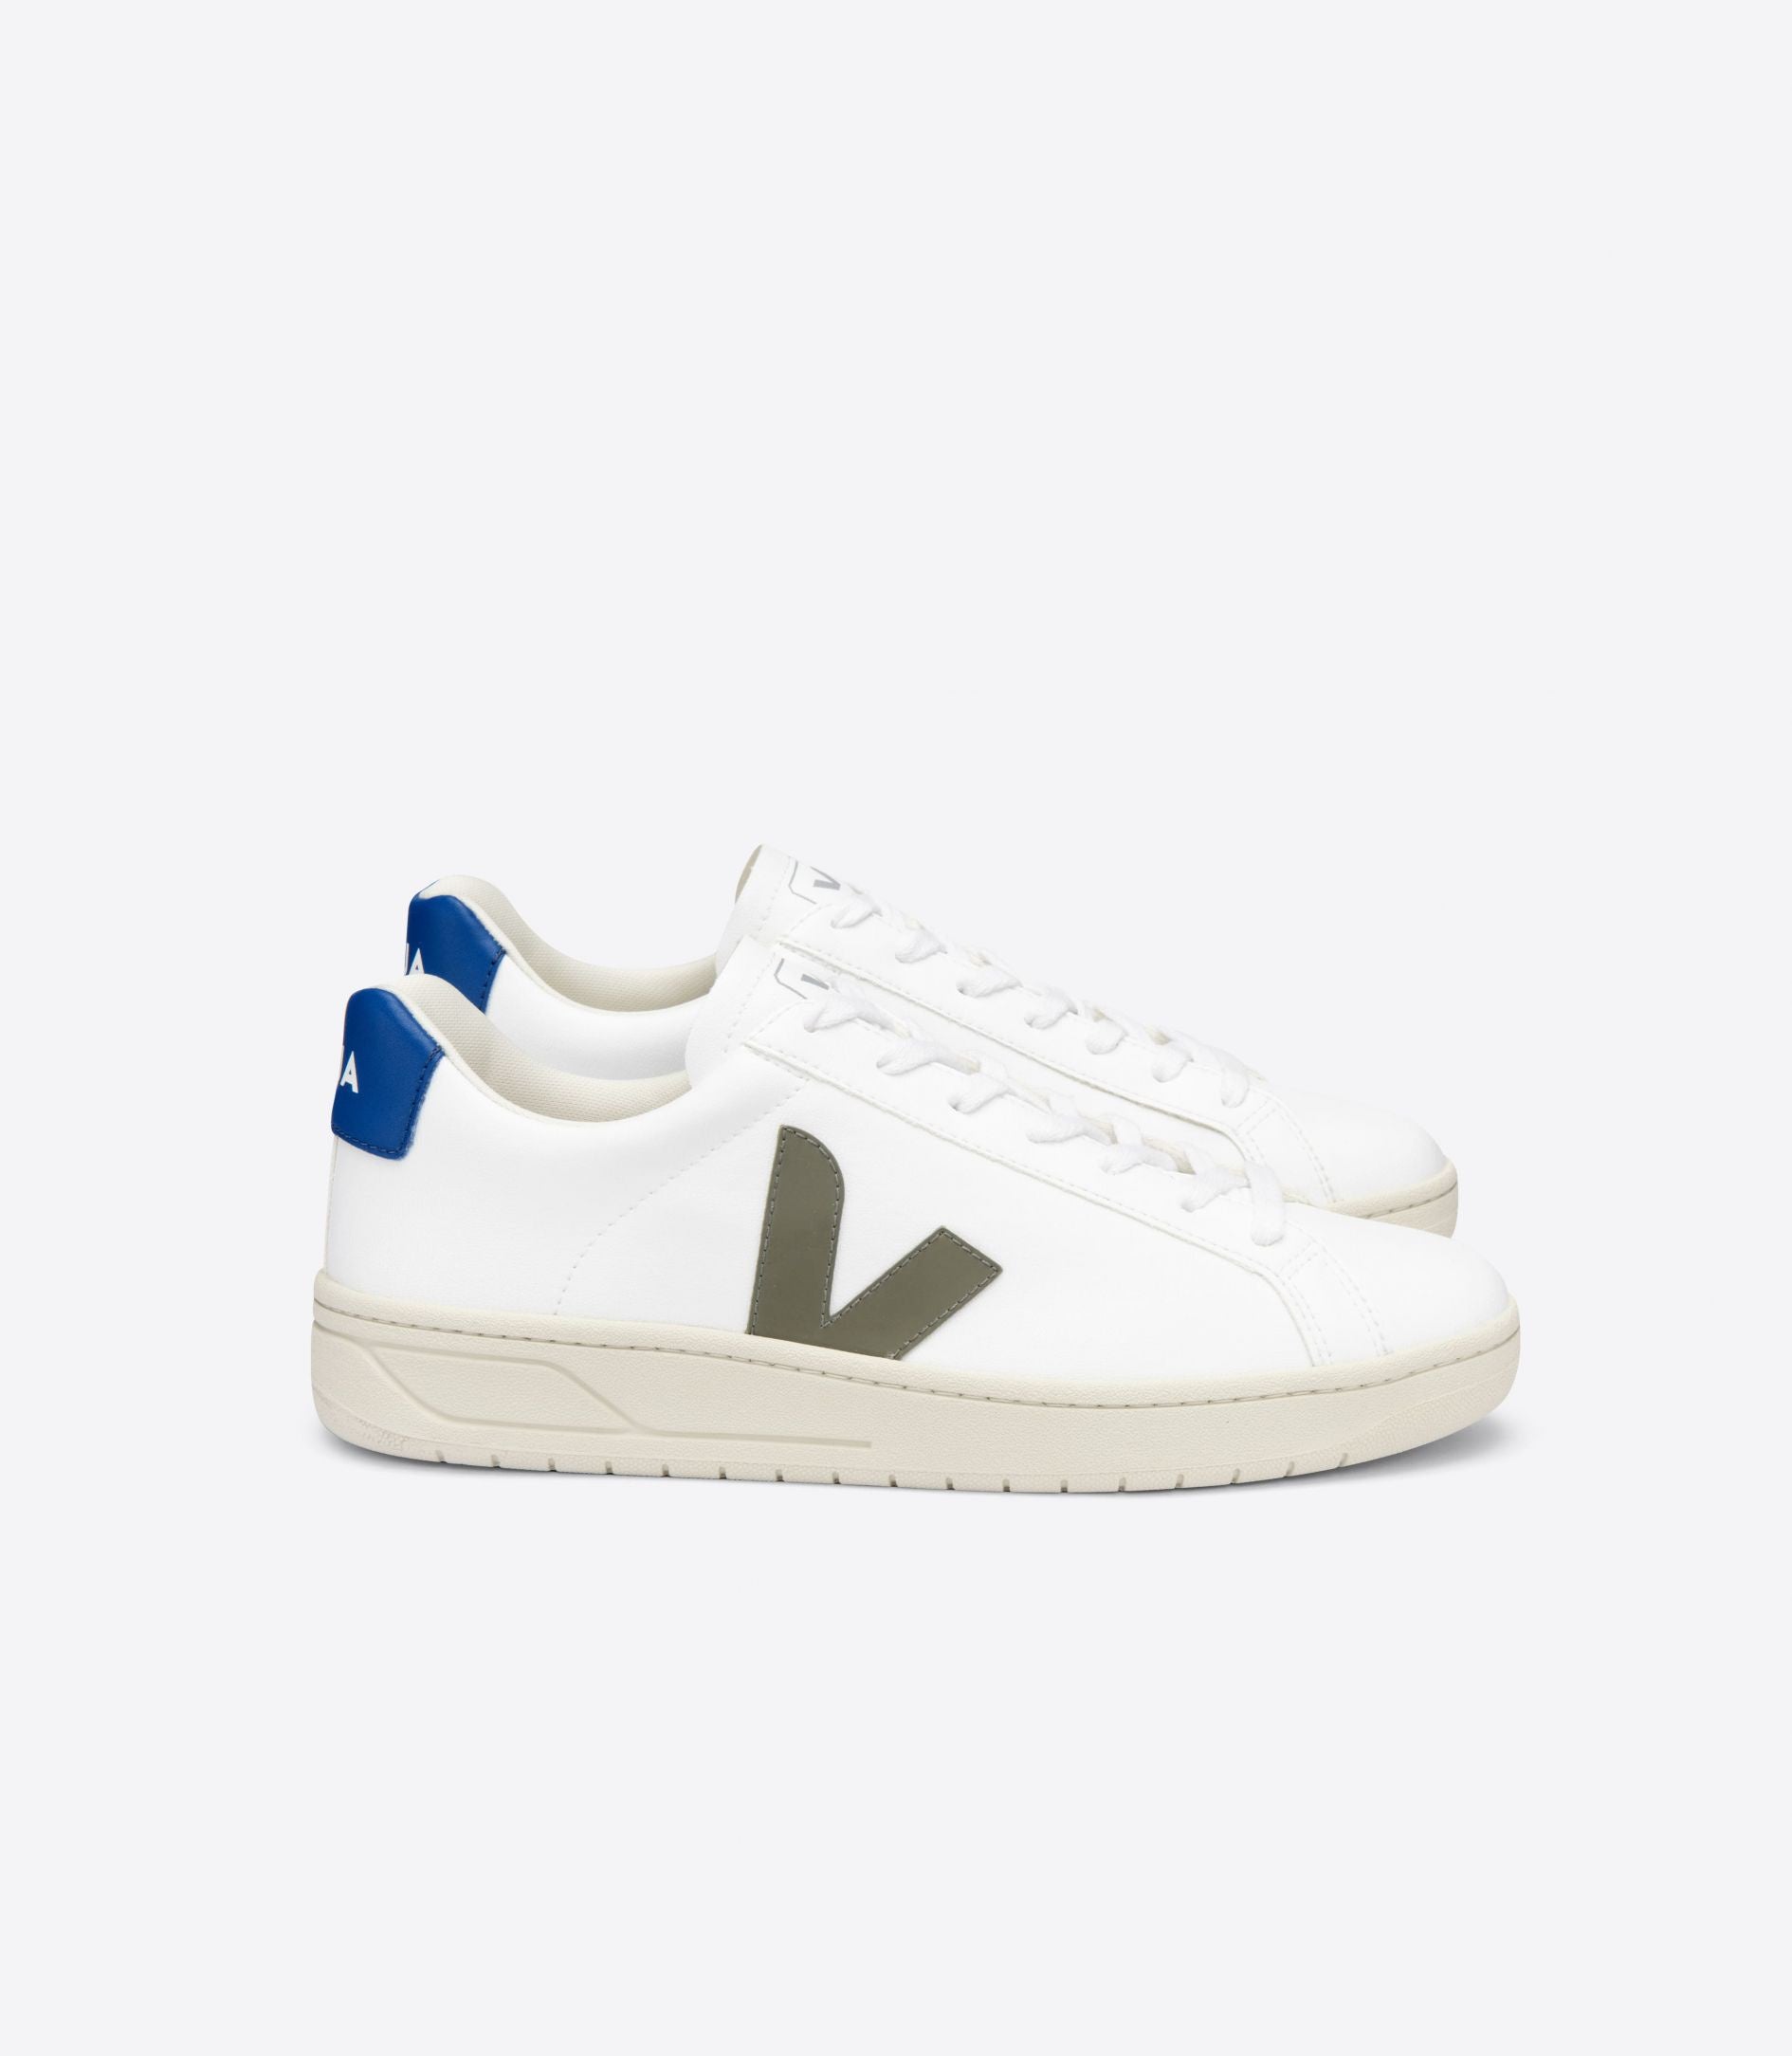 VEJA 72617 Urca Trainers in White and Khaki